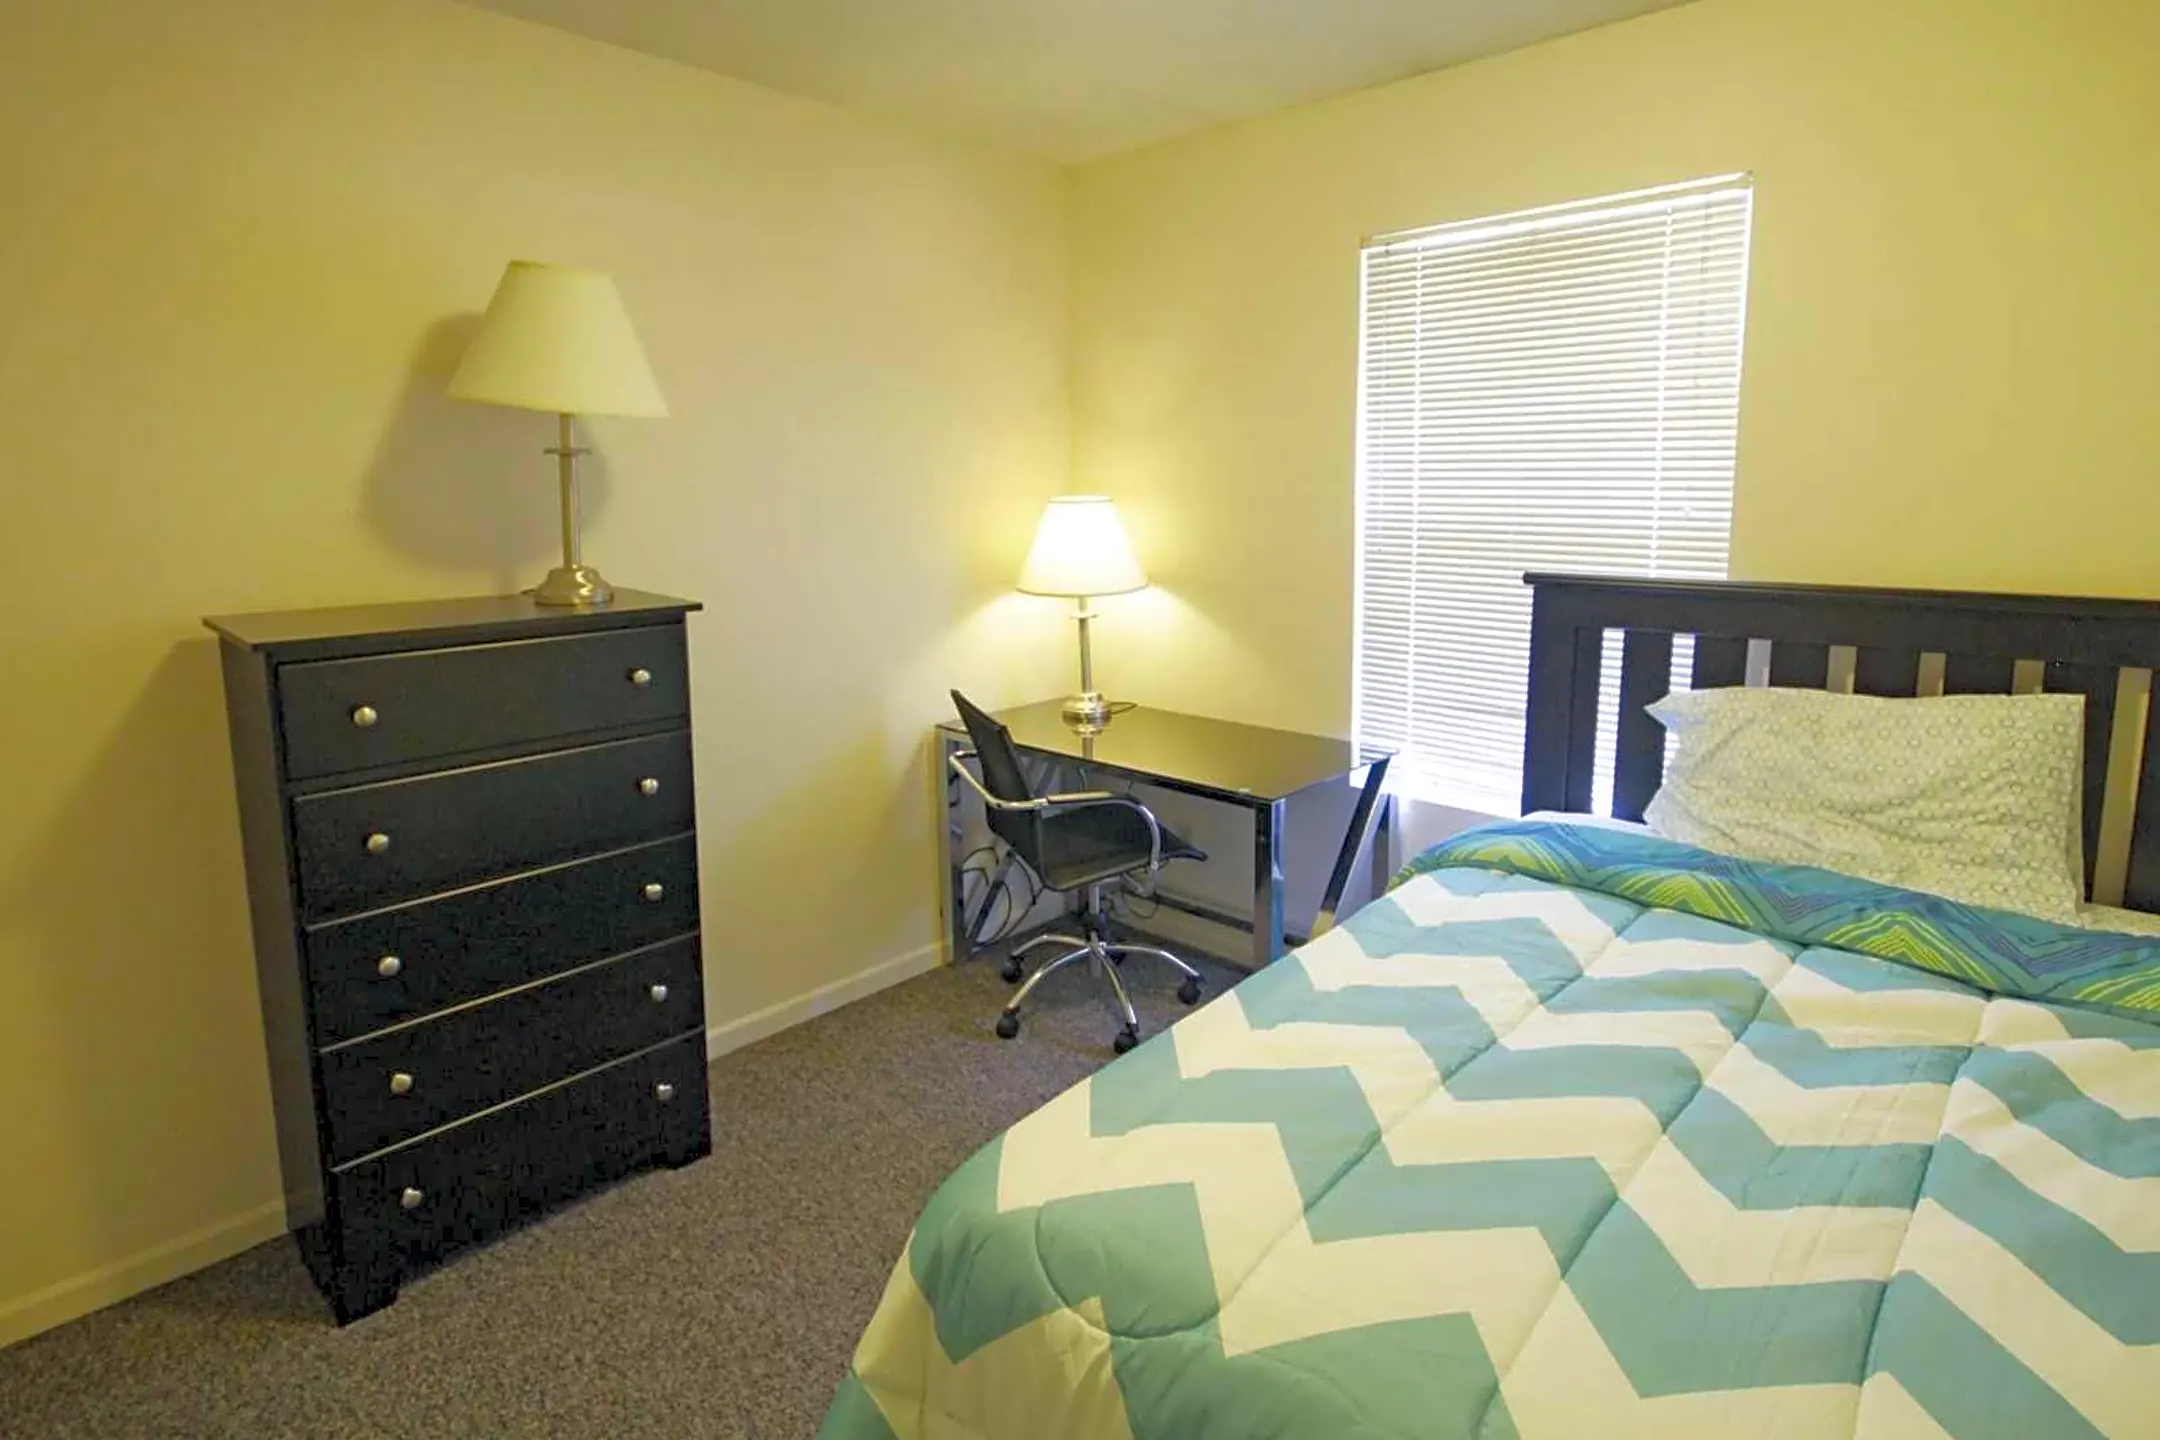 Bedroom - Eddy Street Student Townhomes - South Bend, IN